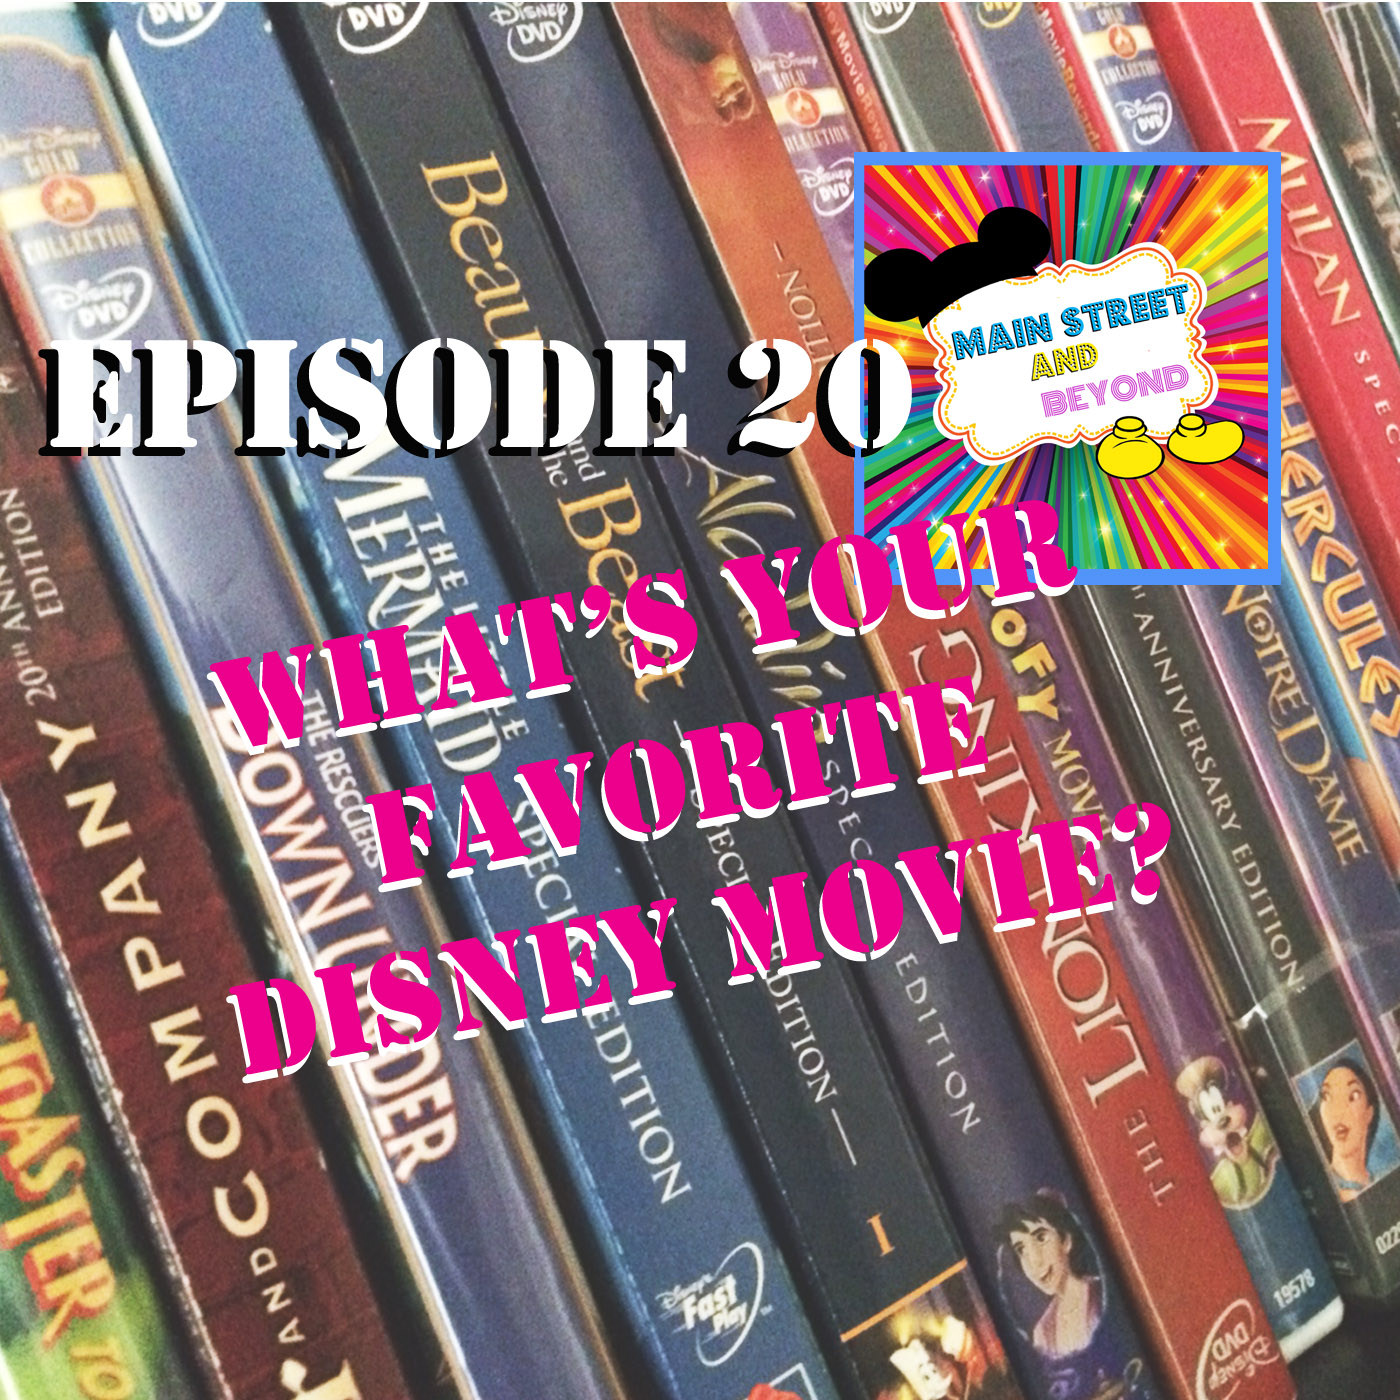 MSB Episode 20: What's your favorite Disney Movie?